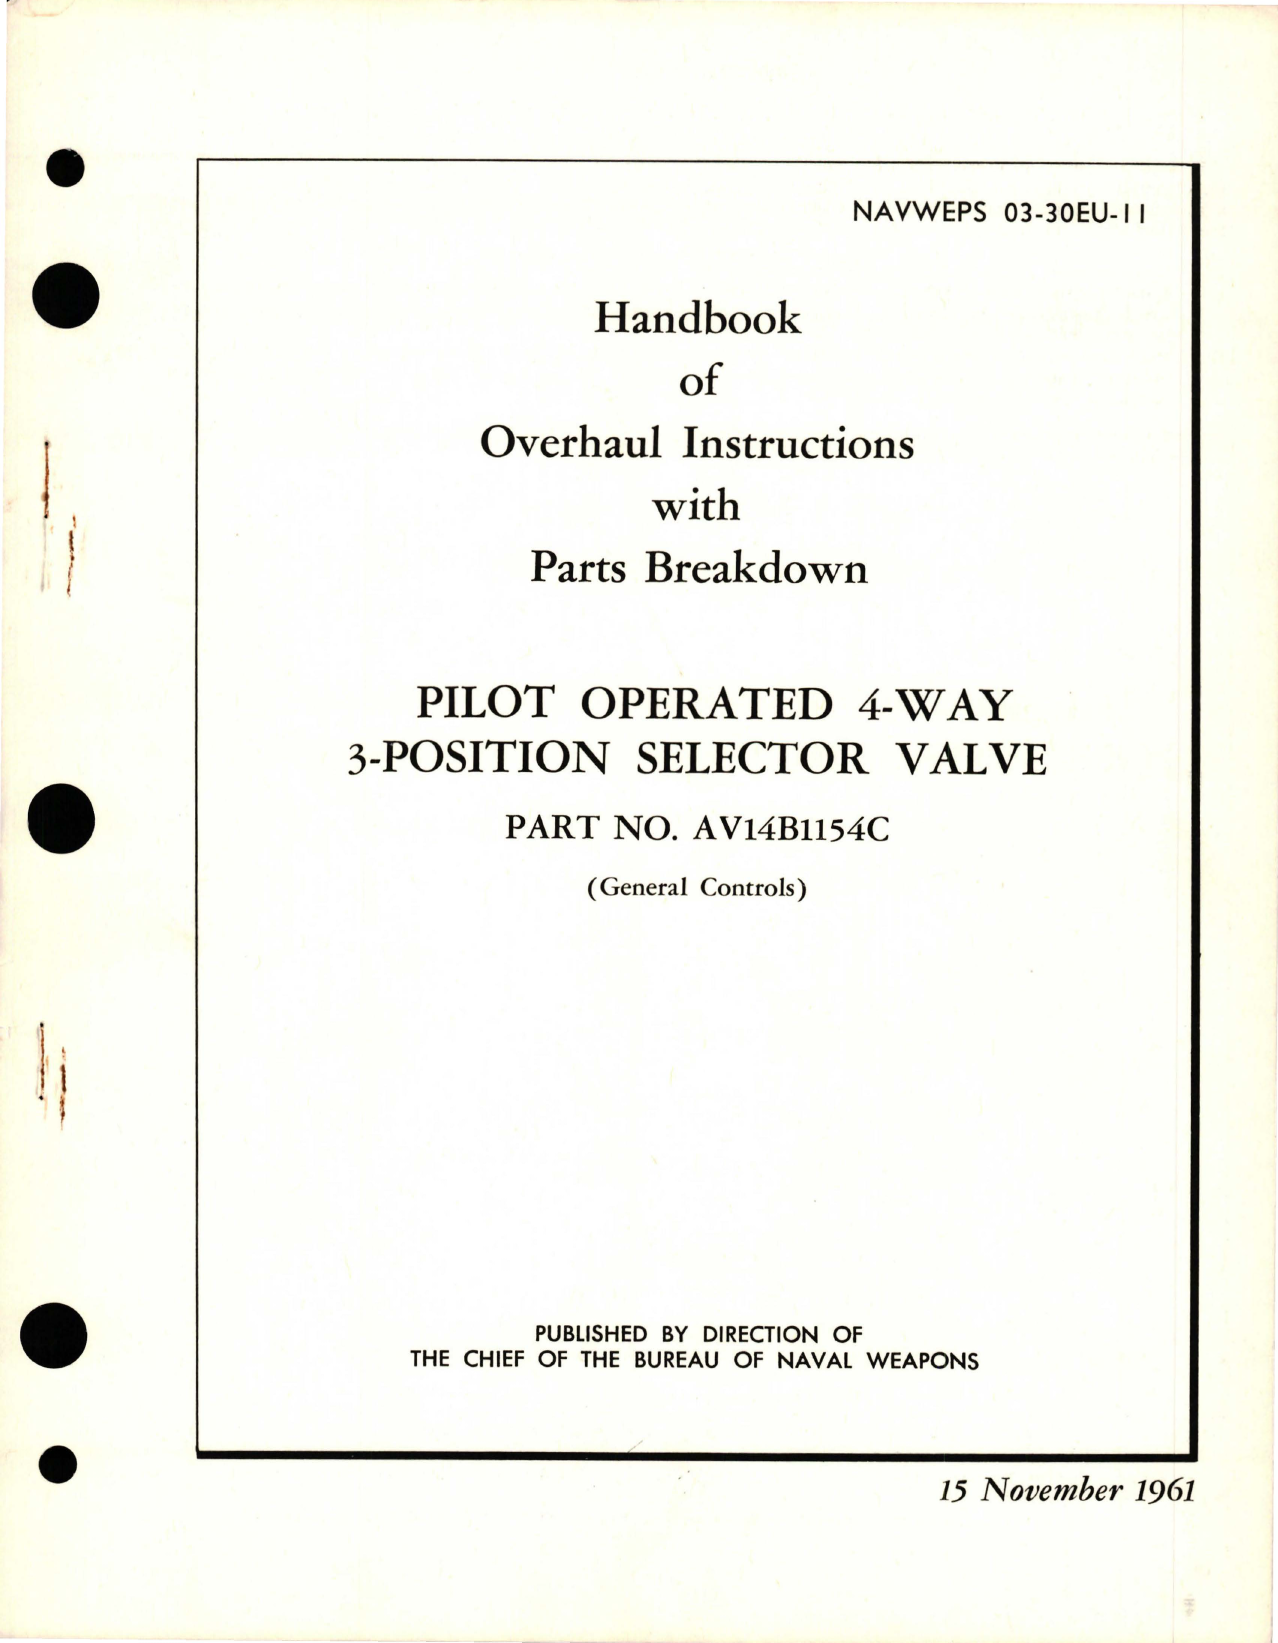 Sample page 1 from AirCorps Library document: Overhaul Instructions w Parts Breakdiown for Pilot Operated 4-Way 3-Position Selector Valve - Part AV14B1154C